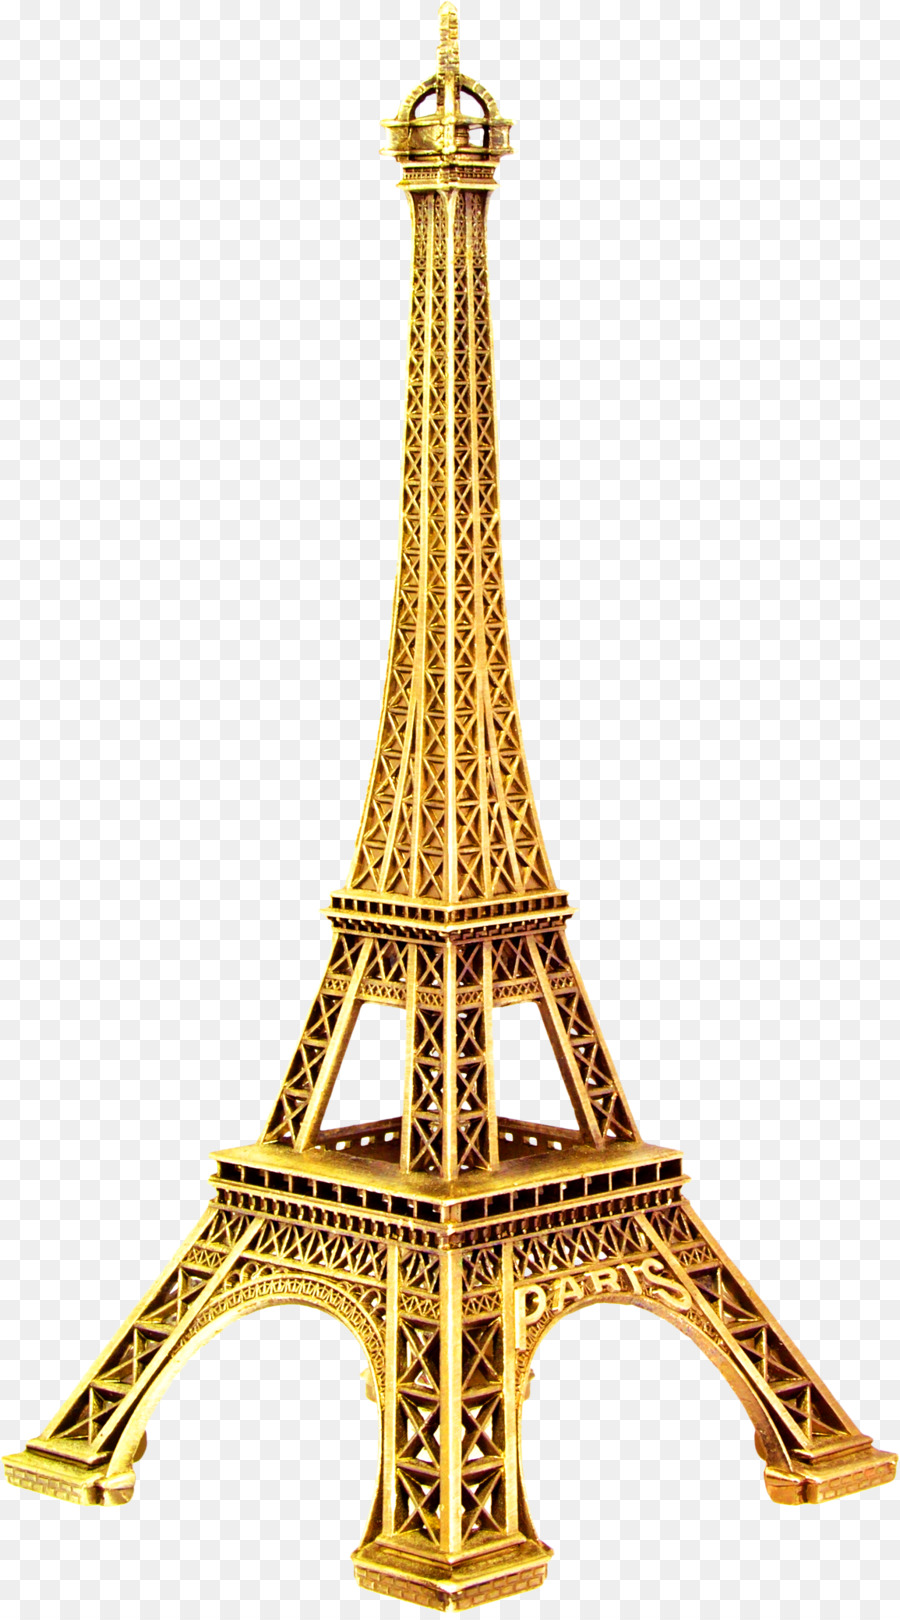 Eiffel Tower Stock photography Clip art - Paris png download - 1155*2071 - Free Transparent Eiffel Tower png Download.